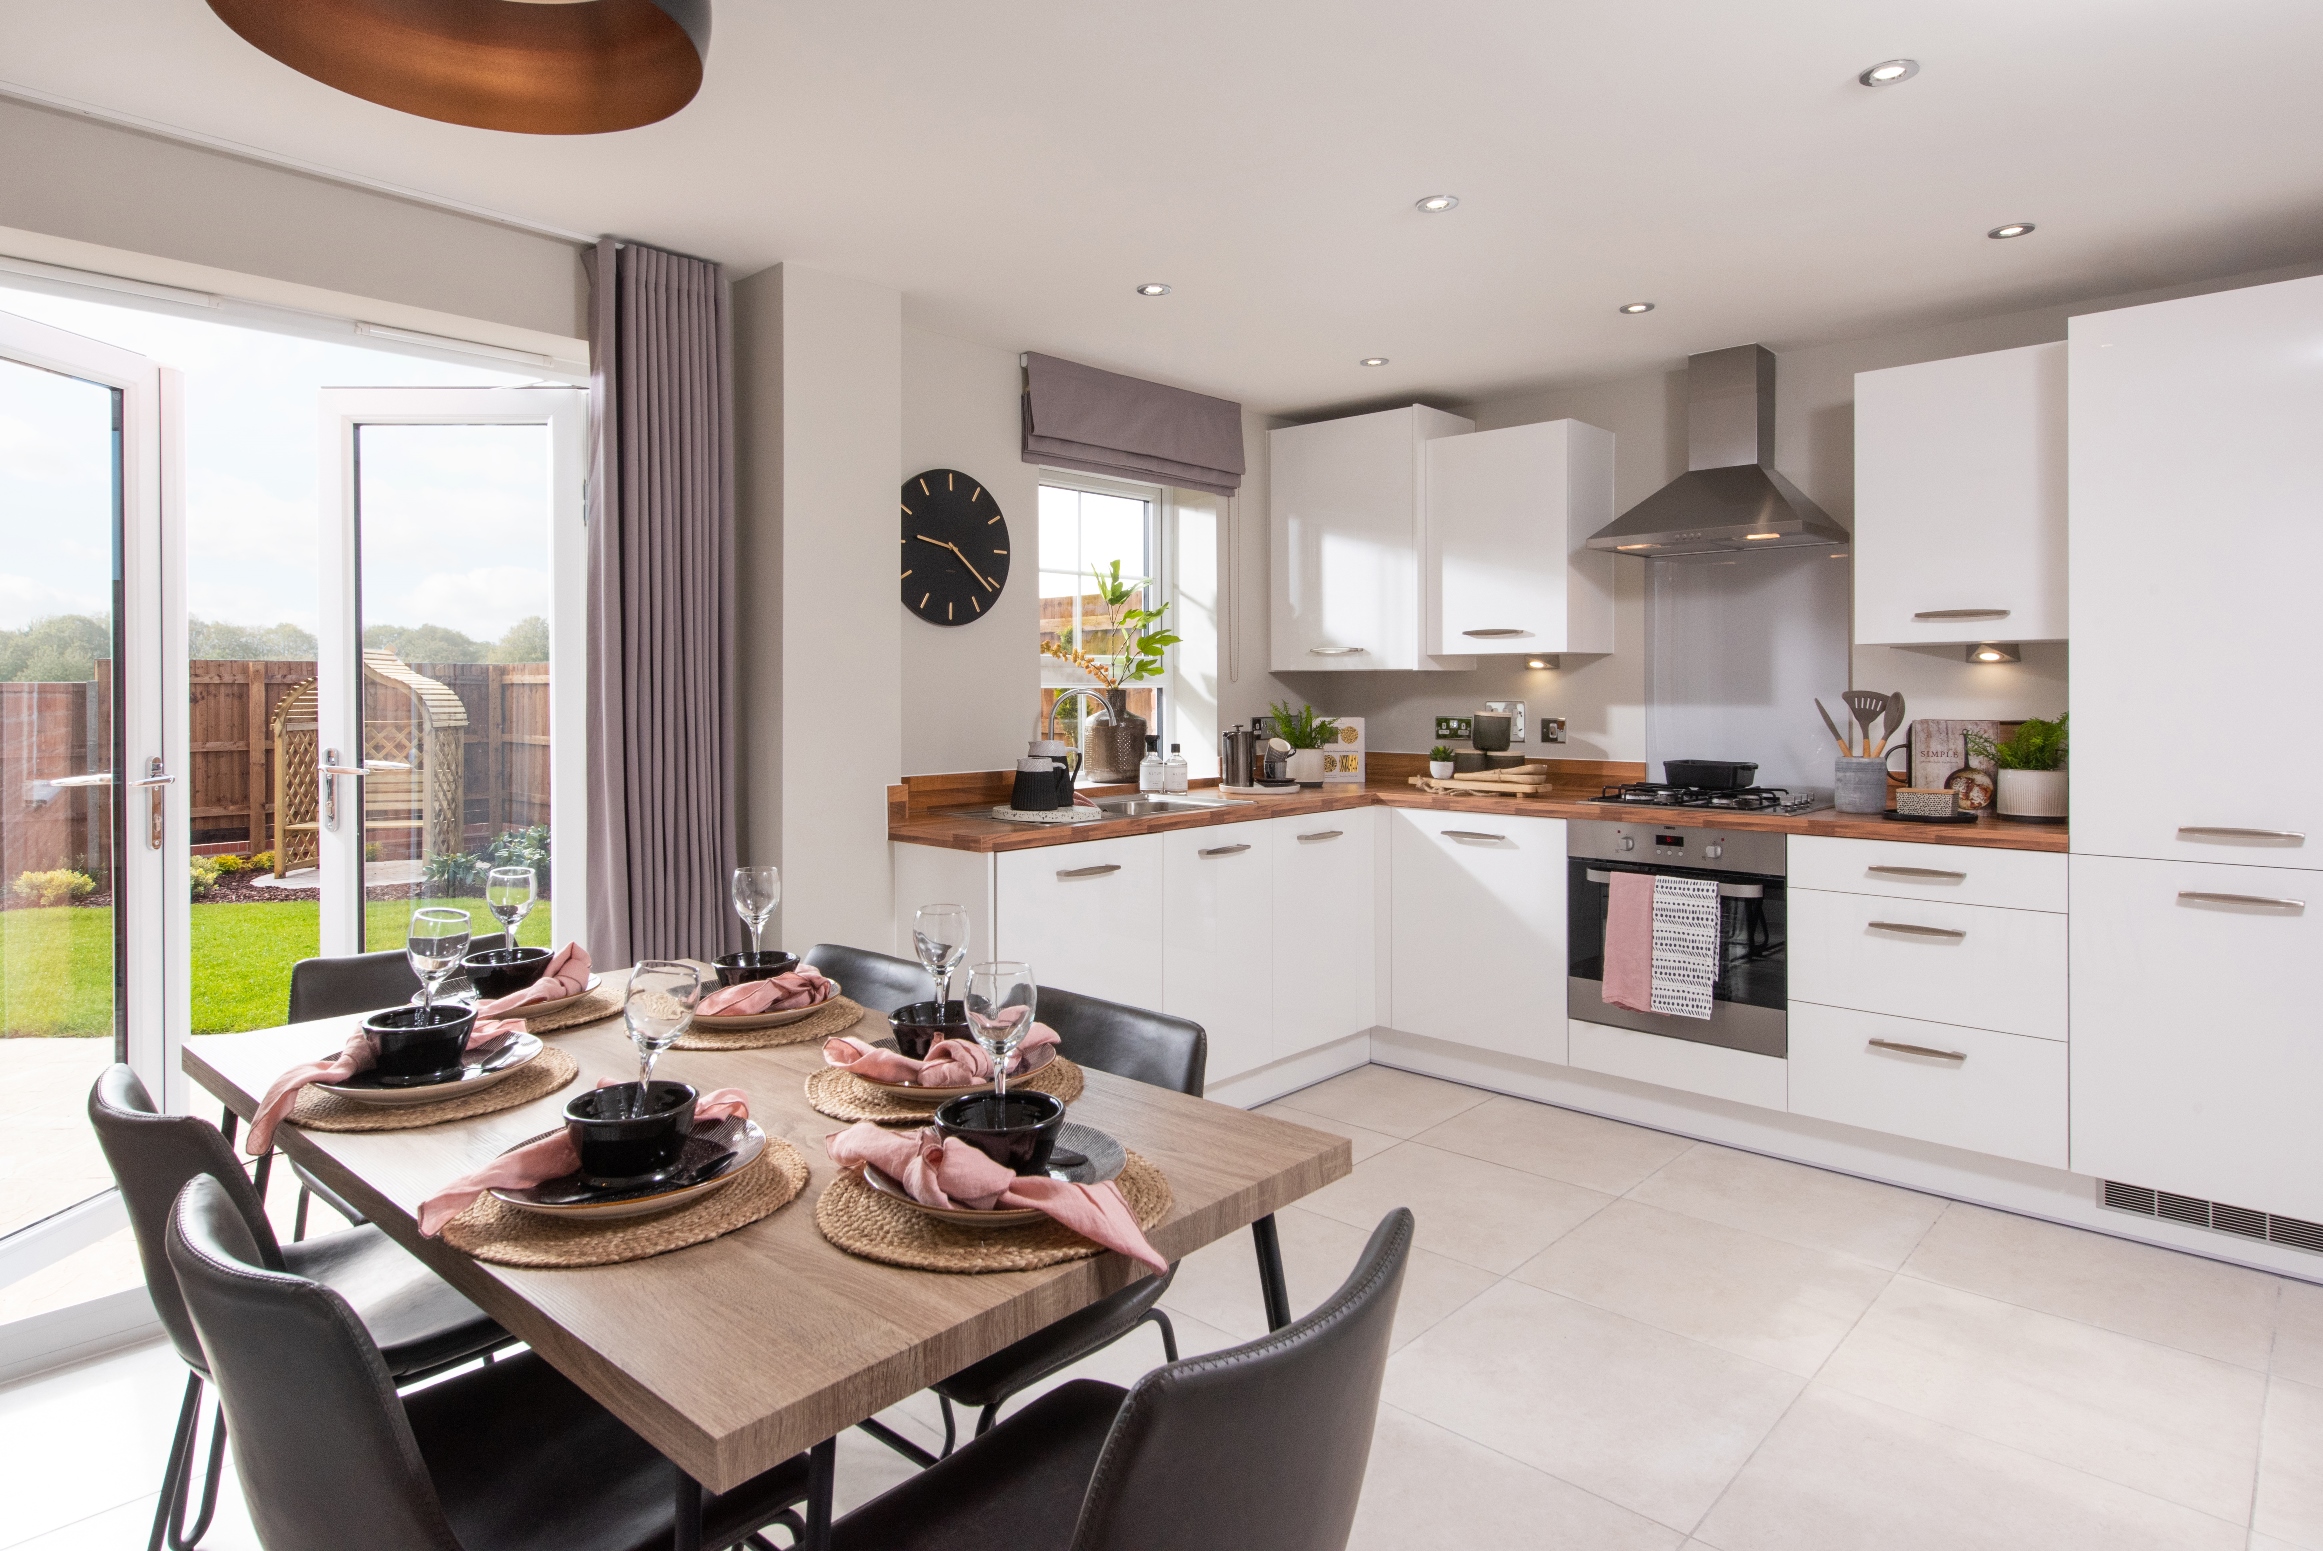 B&DWNM – A typical Barratt kitchen and dining area in the Maidstone